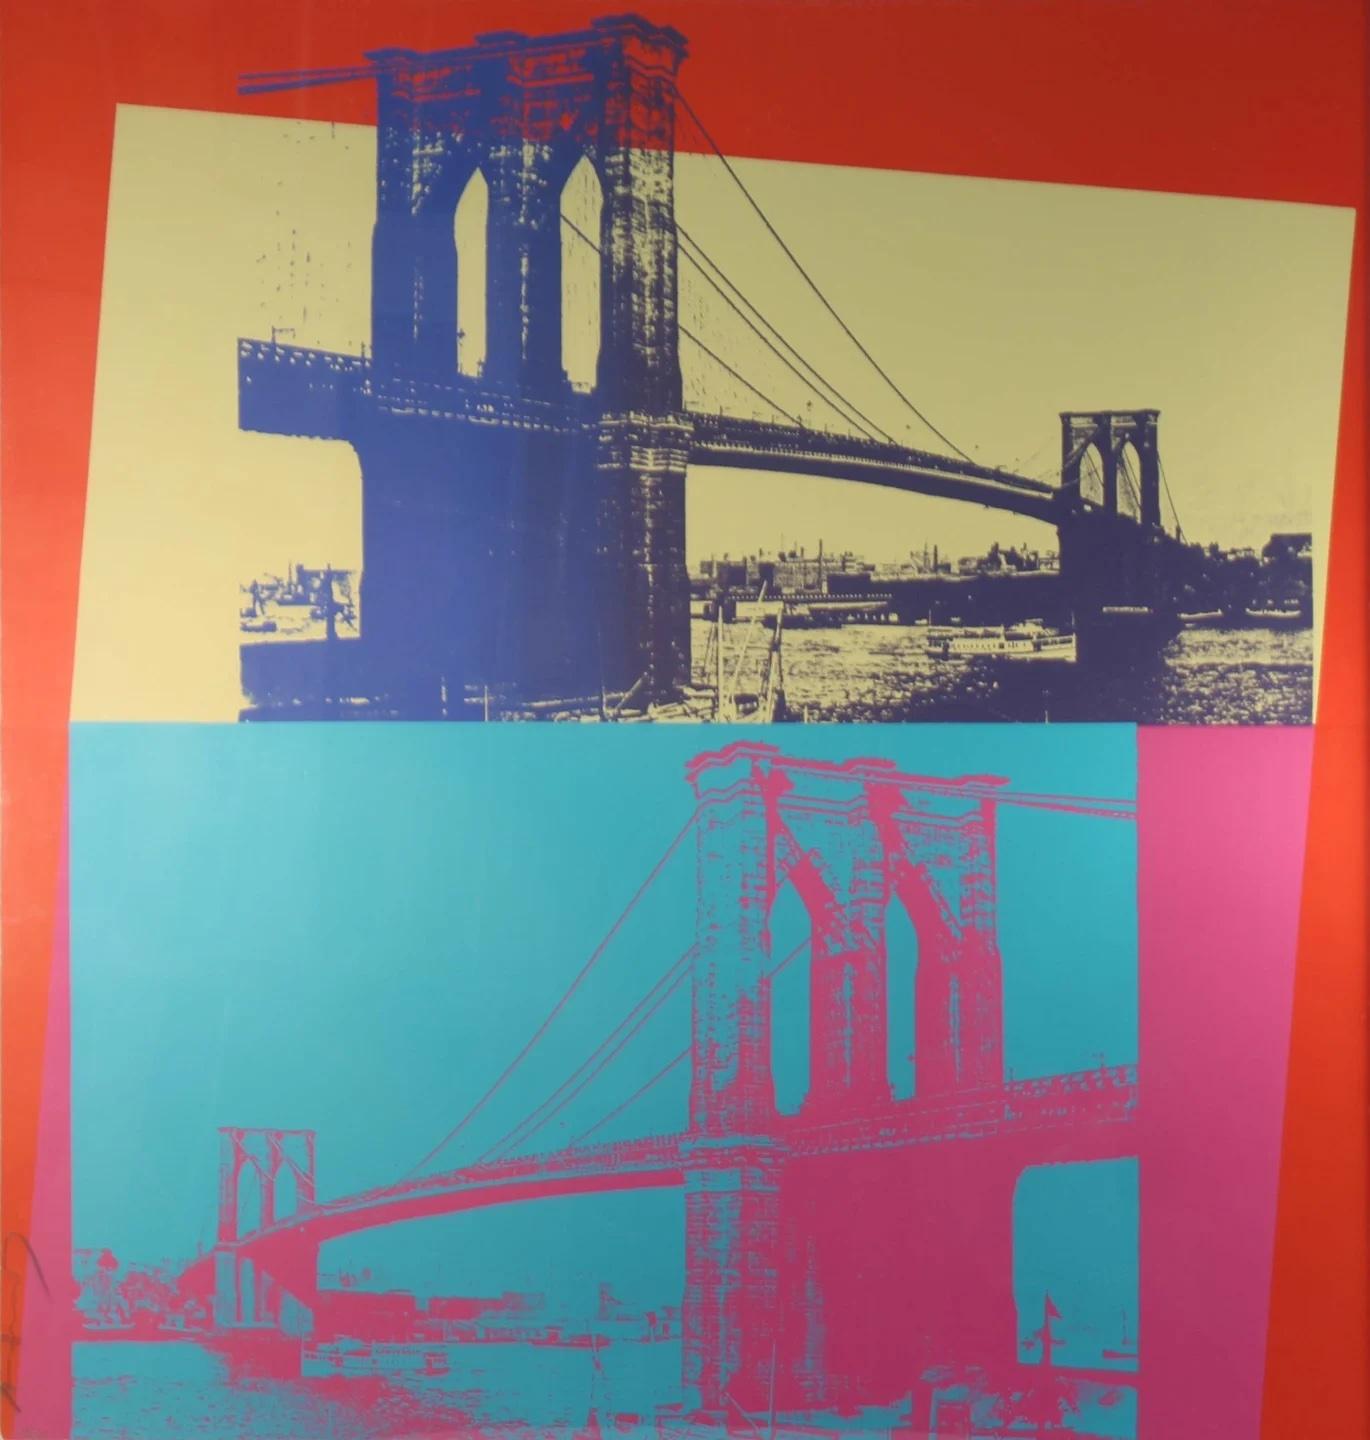 Andy Warhol's 'Brooklyn Bridge' is a screenprint created in 1983. Signed in pencil on the lower left corner, marked 40 from an edition of 200 (there were also 20 artist's proofs). Published by the 1983 Brooklyn Bridge Centennial Commission, Inc.,